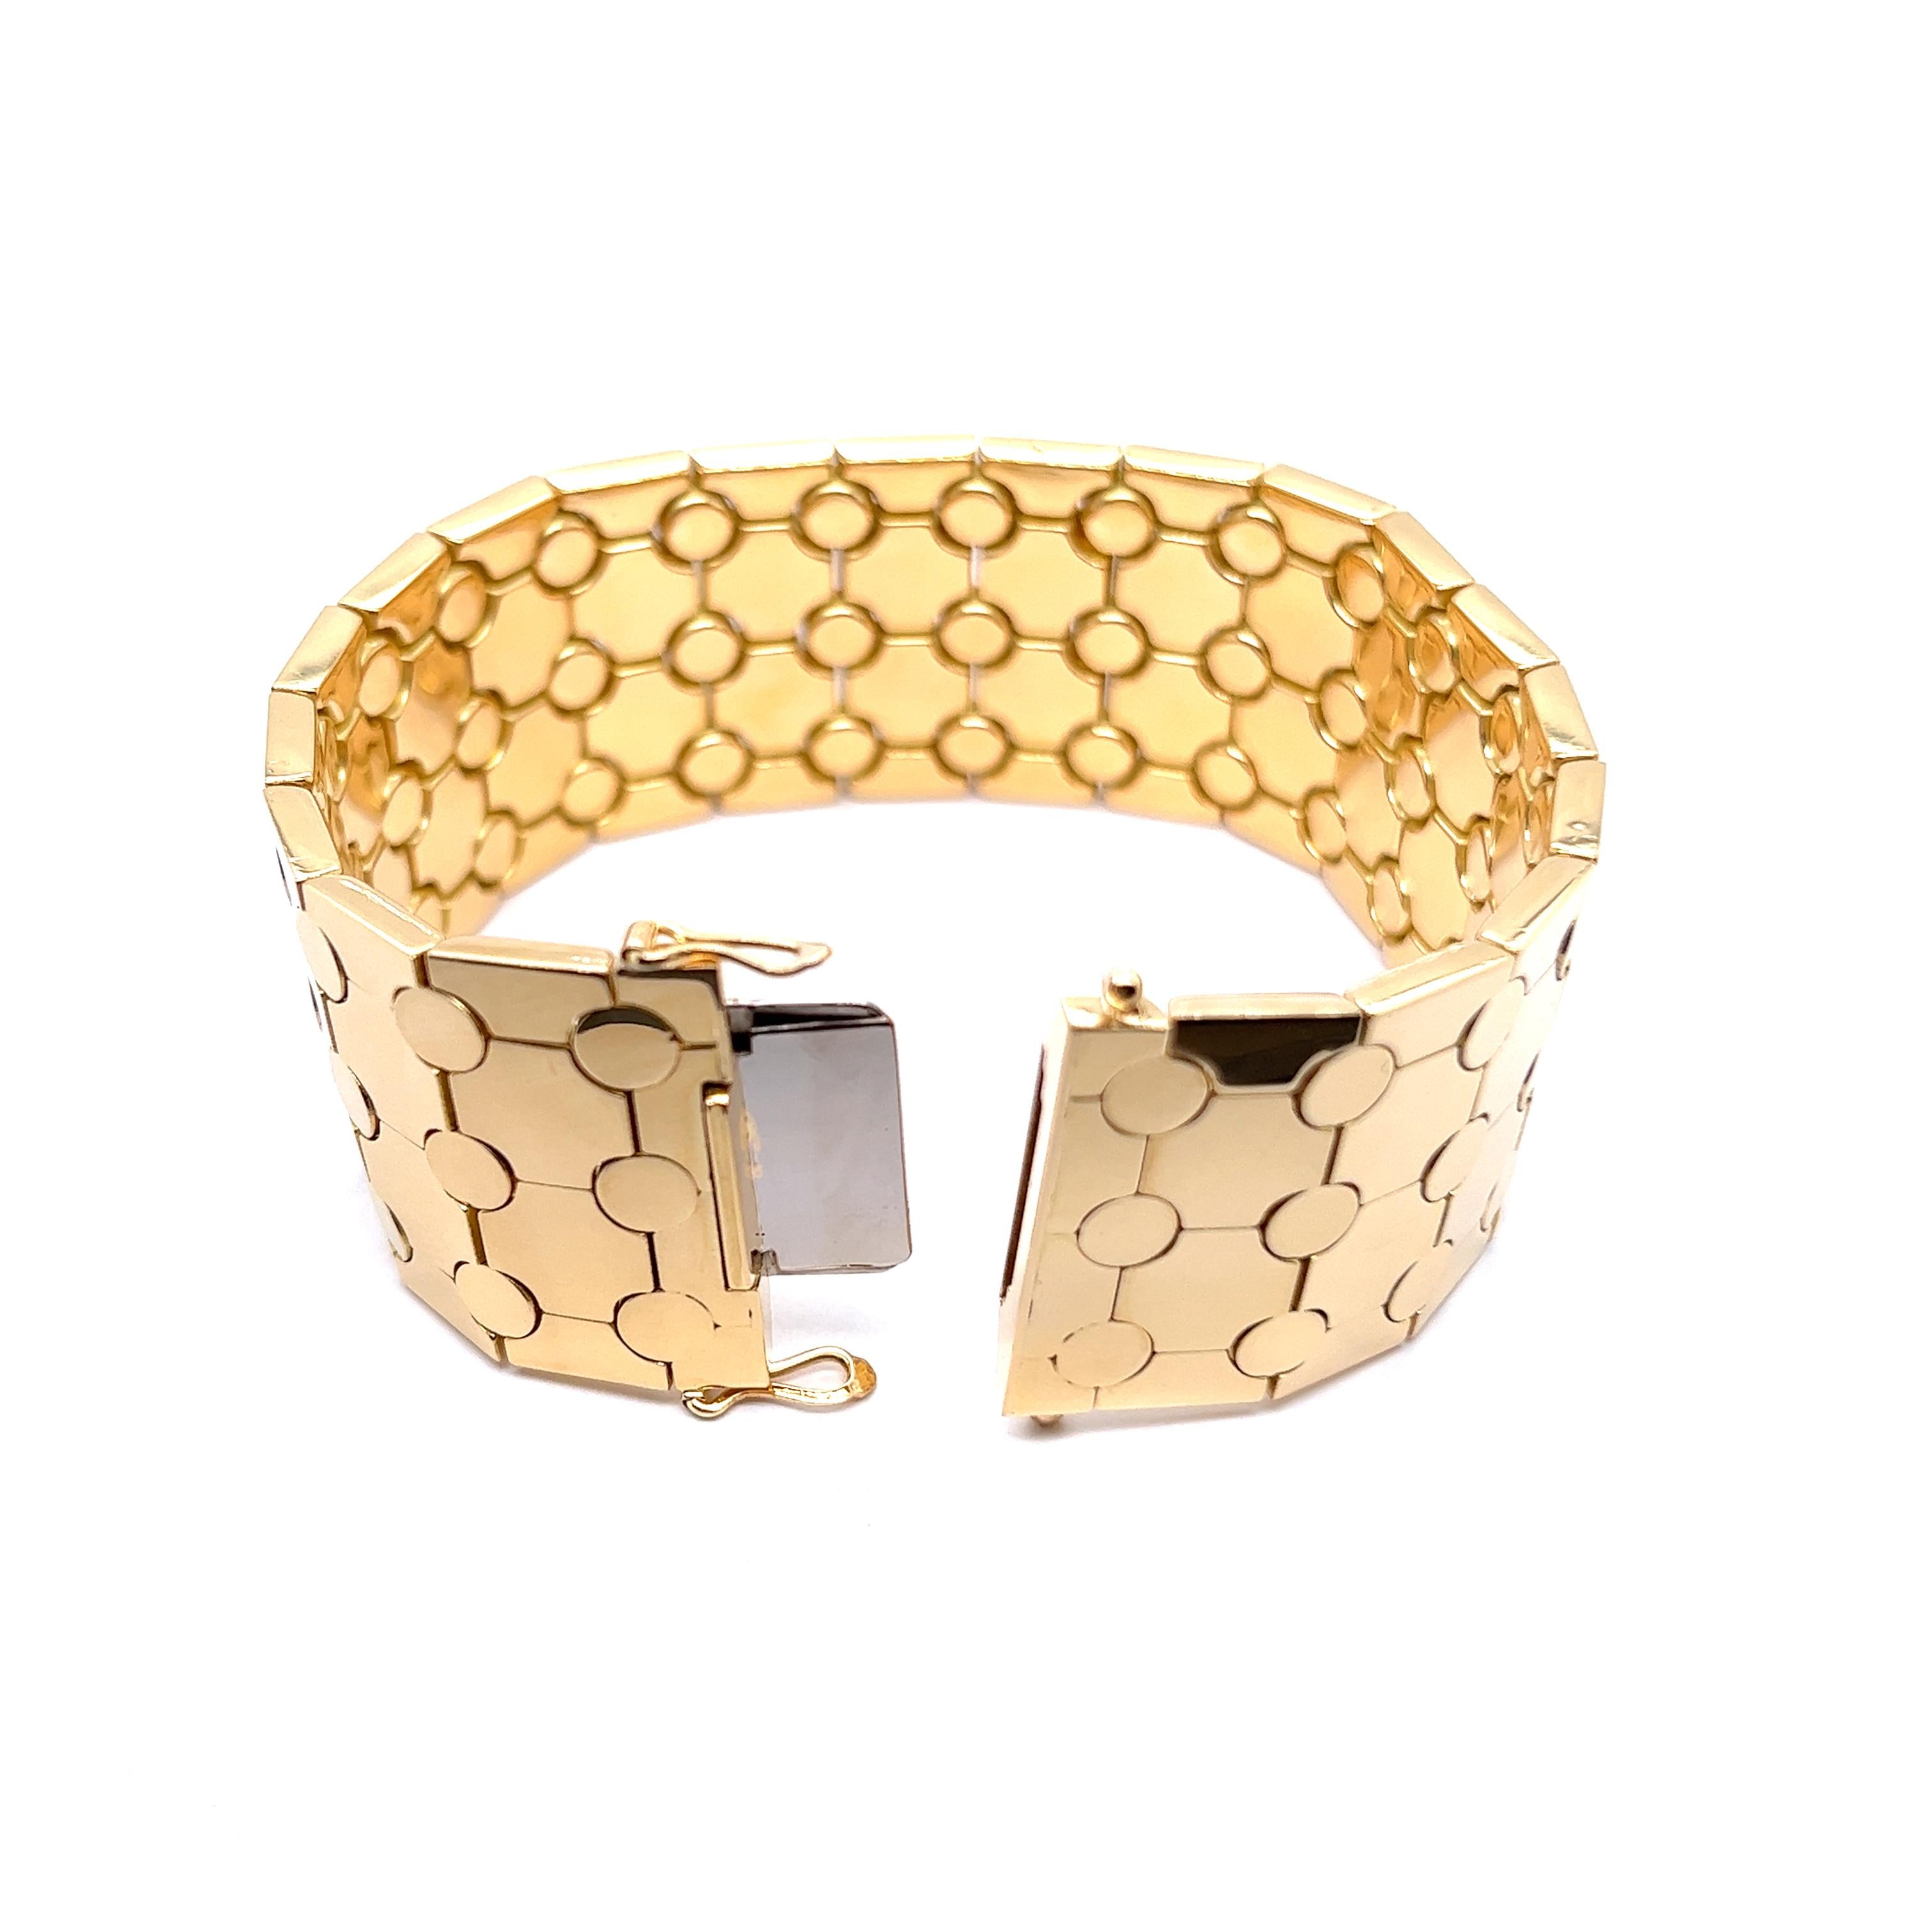 Introducing the epitome of opulence - 18 Karat yellow gold bracelet, a true masterpiece of quality and elegance. This luxurious bracelet boasts a mesmerizing graphic pattern reminiscent of a honeycomb, meticulously etched into its 2.7 cm / 1.06 inch